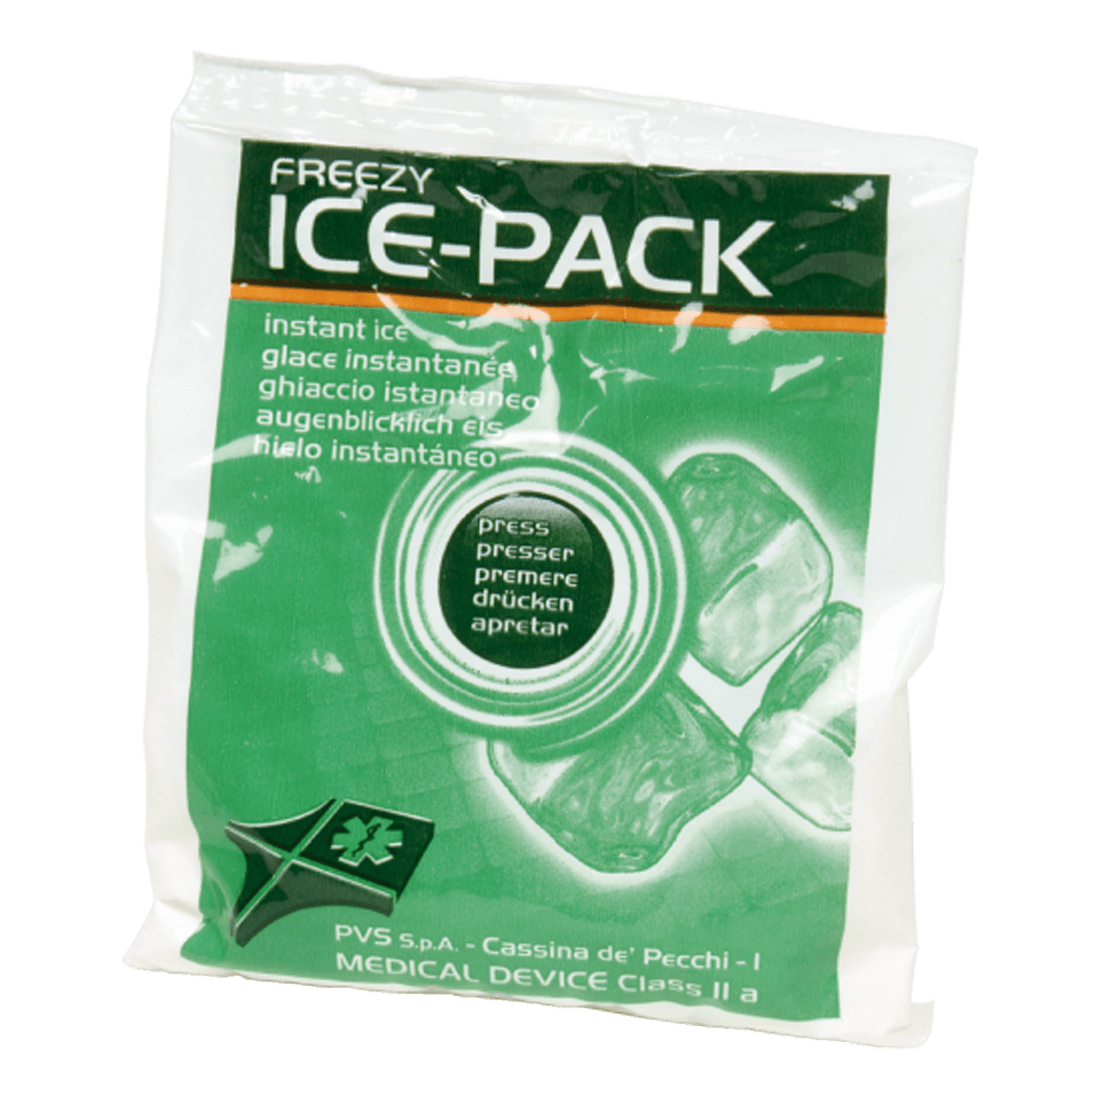 READY-TO-USE ICE PACK